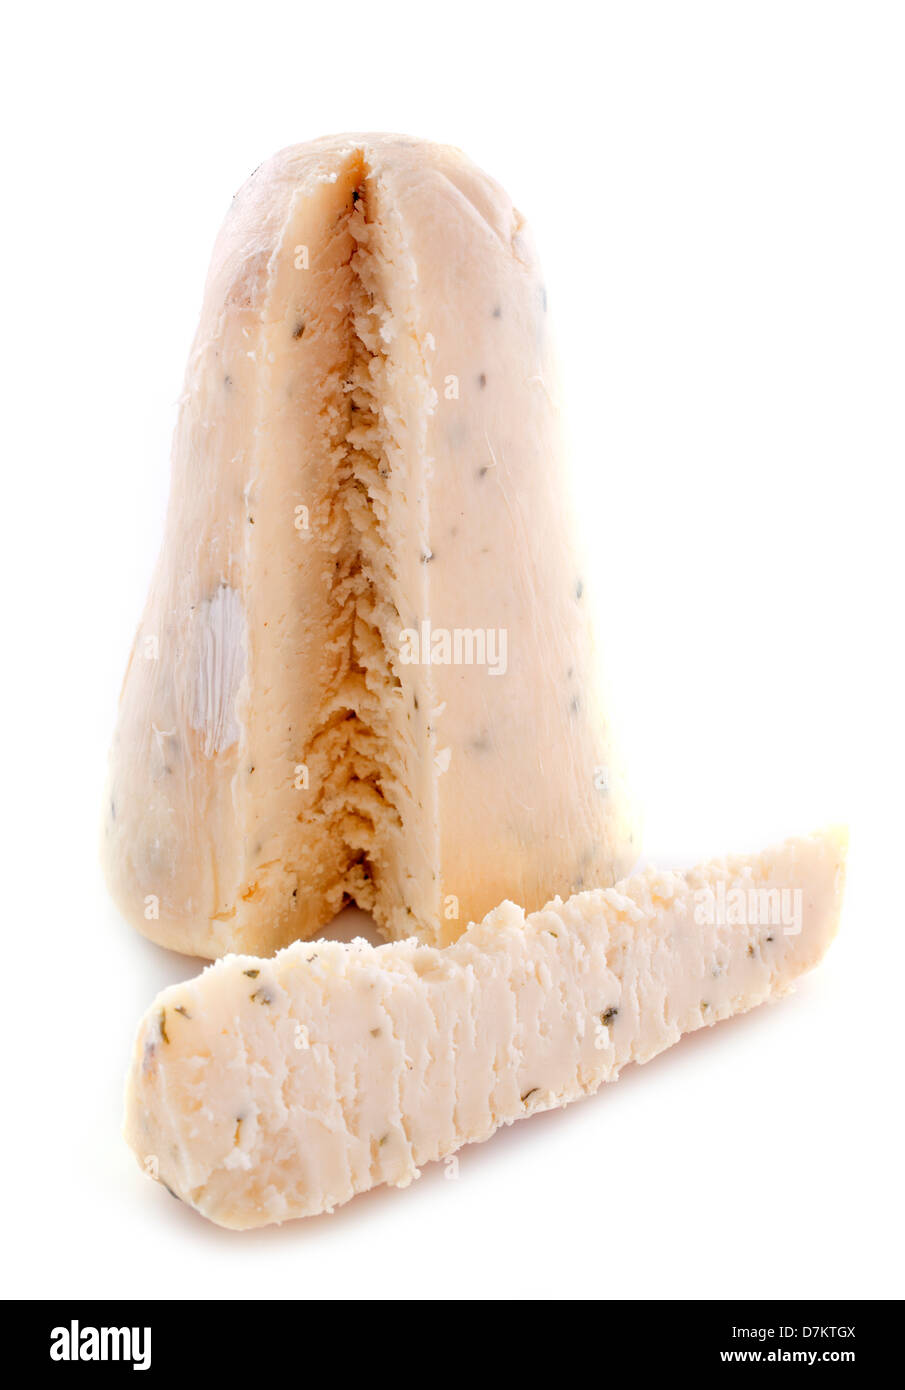 Boulette d Avesnes in front of white background Stock Photo